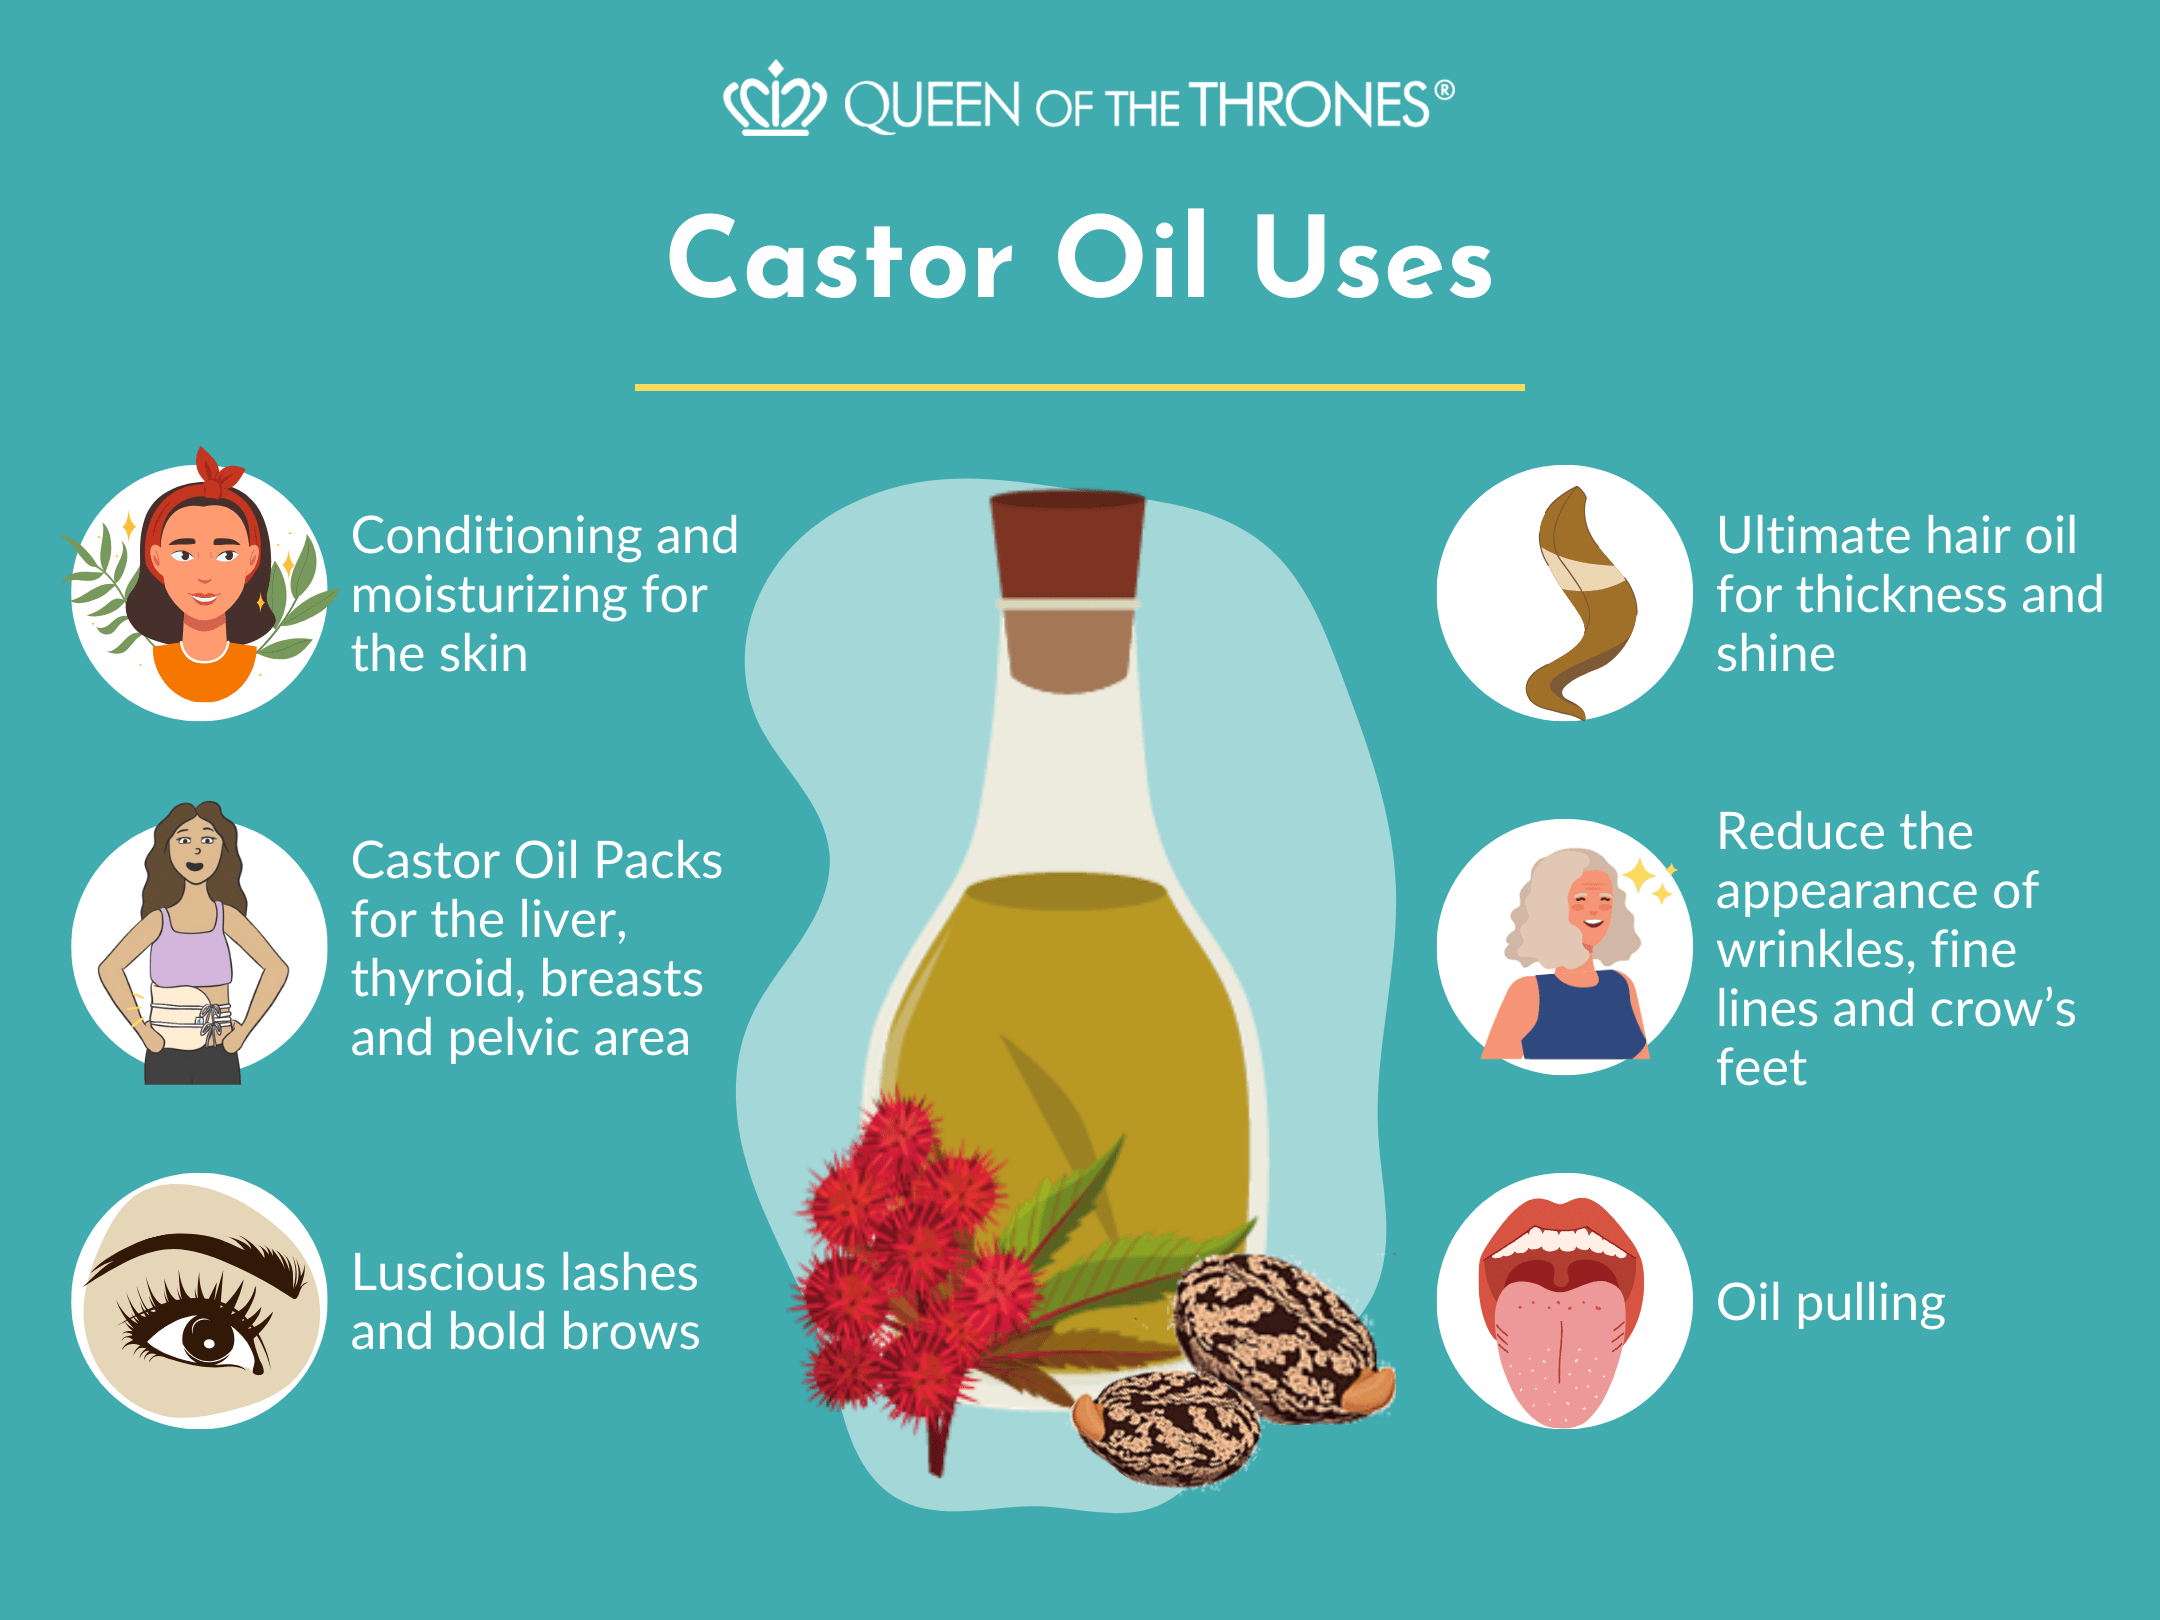 Uses of Castor Oil by Queen of the Thrones